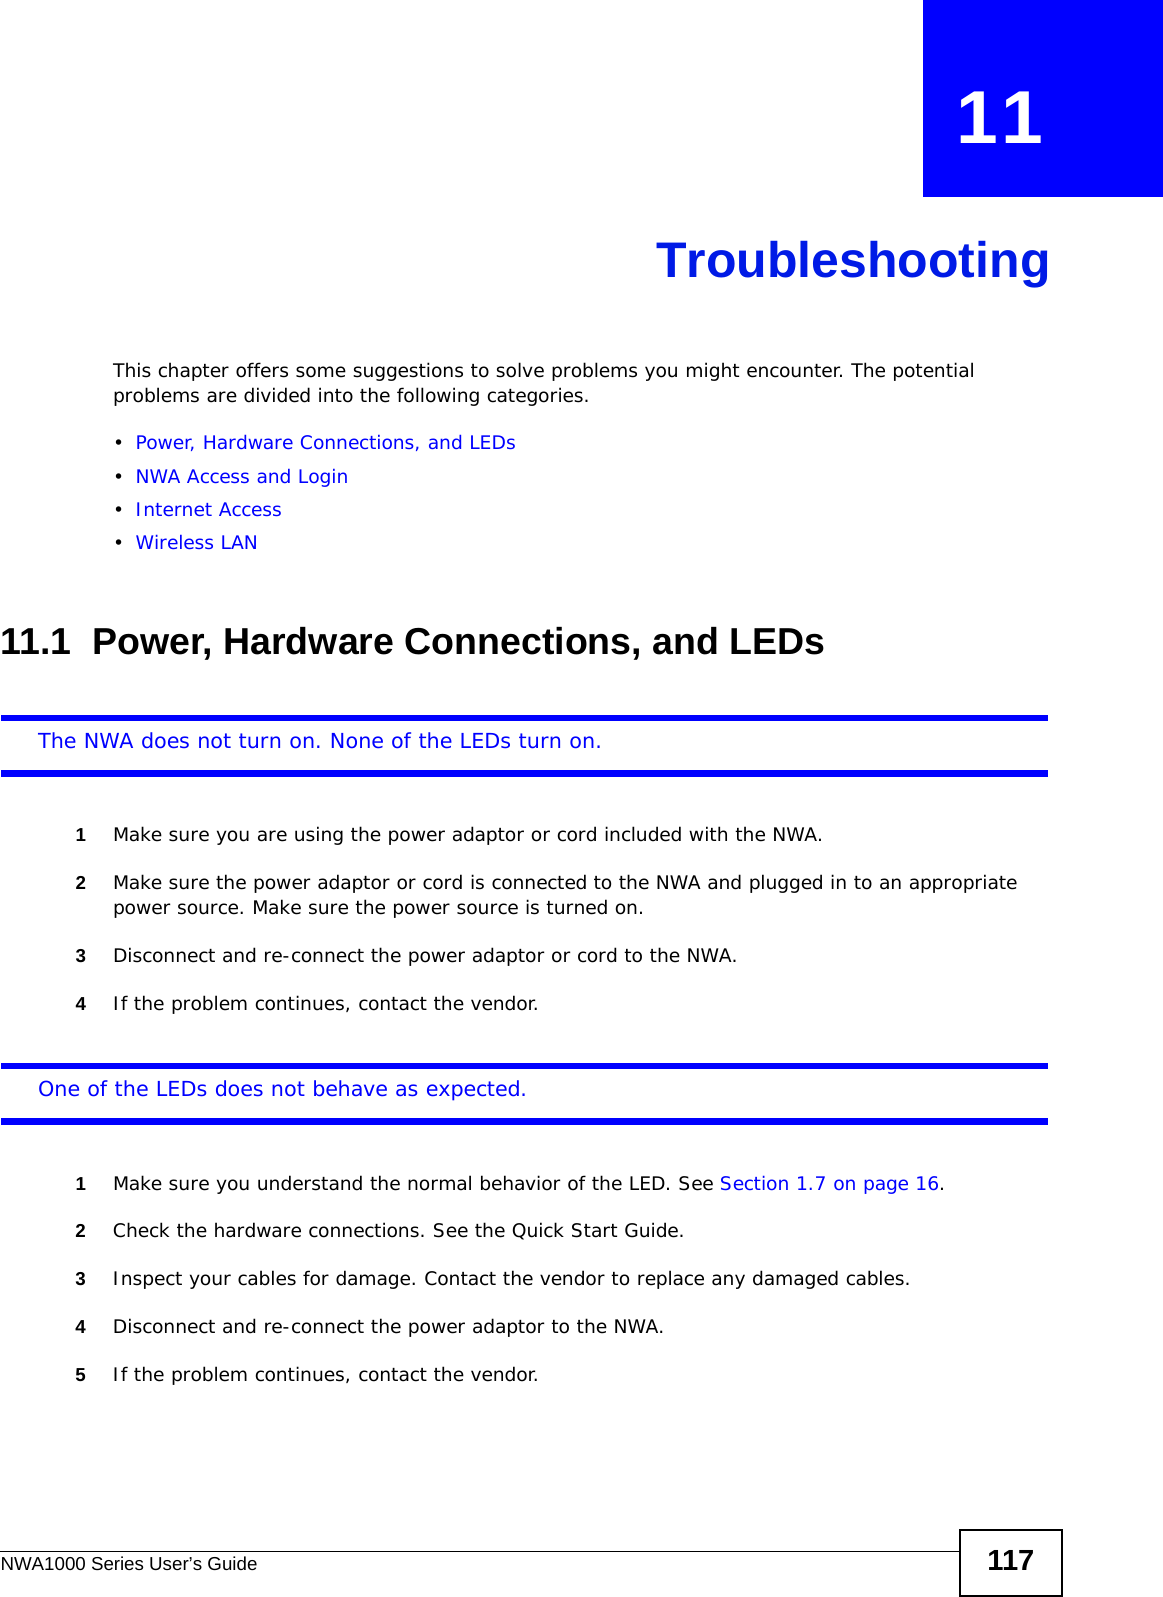 NWA1000 Series User’s Guide 117CHAPTER   11TroubleshootingThis chapter offers some suggestions to solve problems you might encounter. The potential problems are divided into the following categories.•Power, Hardware Connections, and LEDs•NWA Access and Login•Internet Access•Wireless LAN11.1  Power, Hardware Connections, and LEDsThe NWA does not turn on. None of the LEDs turn on.1Make sure you are using the power adaptor or cord included with the NWA.2Make sure the power adaptor or cord is connected to the NWA and plugged in to an appropriate power source. Make sure the power source is turned on.3Disconnect and re-connect the power adaptor or cord to the NWA. 4If the problem continues, contact the vendor.One of the LEDs does not behave as expected.1Make sure you understand the normal behavior of the LED. See Section 1.7 on page 16.2Check the hardware connections. See the Quick Start Guide.3Inspect your cables for damage. Contact the vendor to replace any damaged cables.4Disconnect and re-connect the power adaptor to the NWA. 5If the problem continues, contact the vendor.